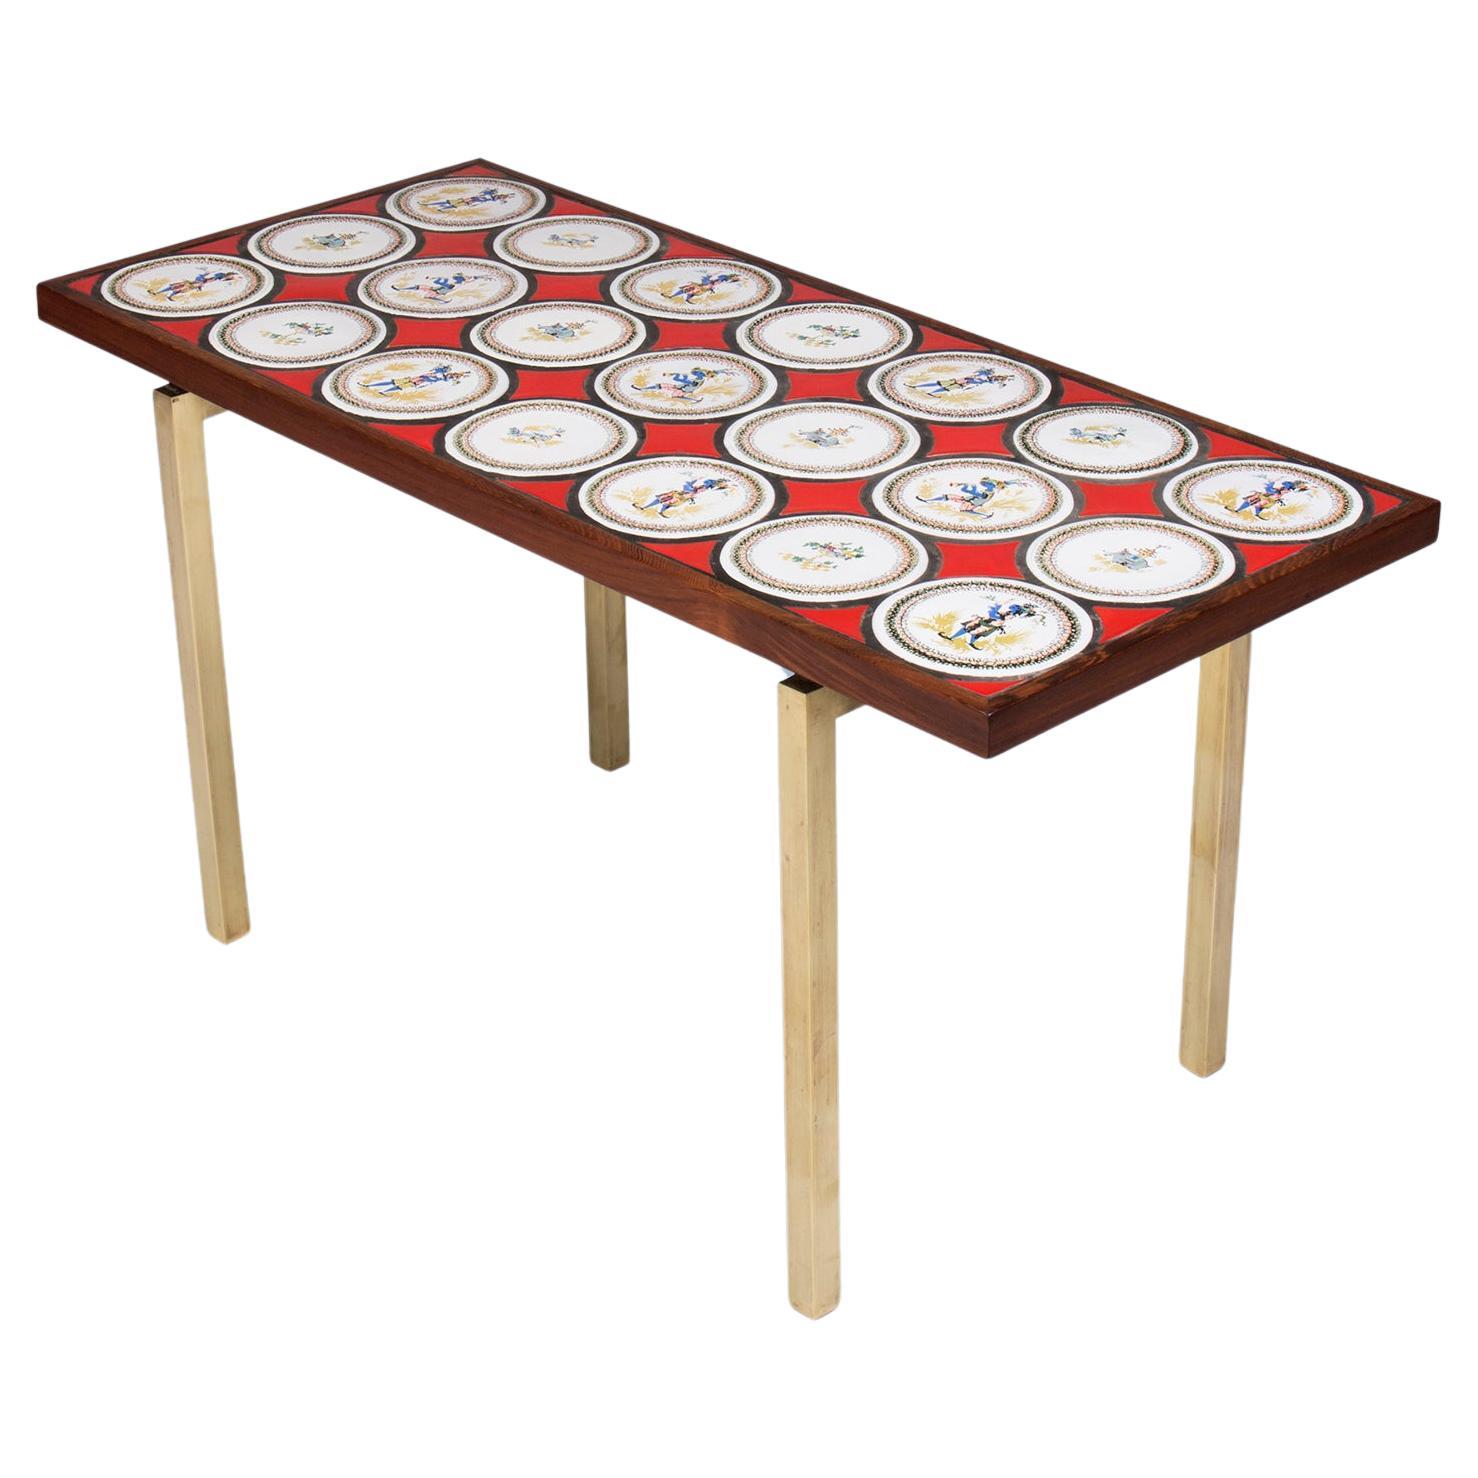 Danish modern coffee table with tiles in red blue, white nuances and bronze legs For Sale